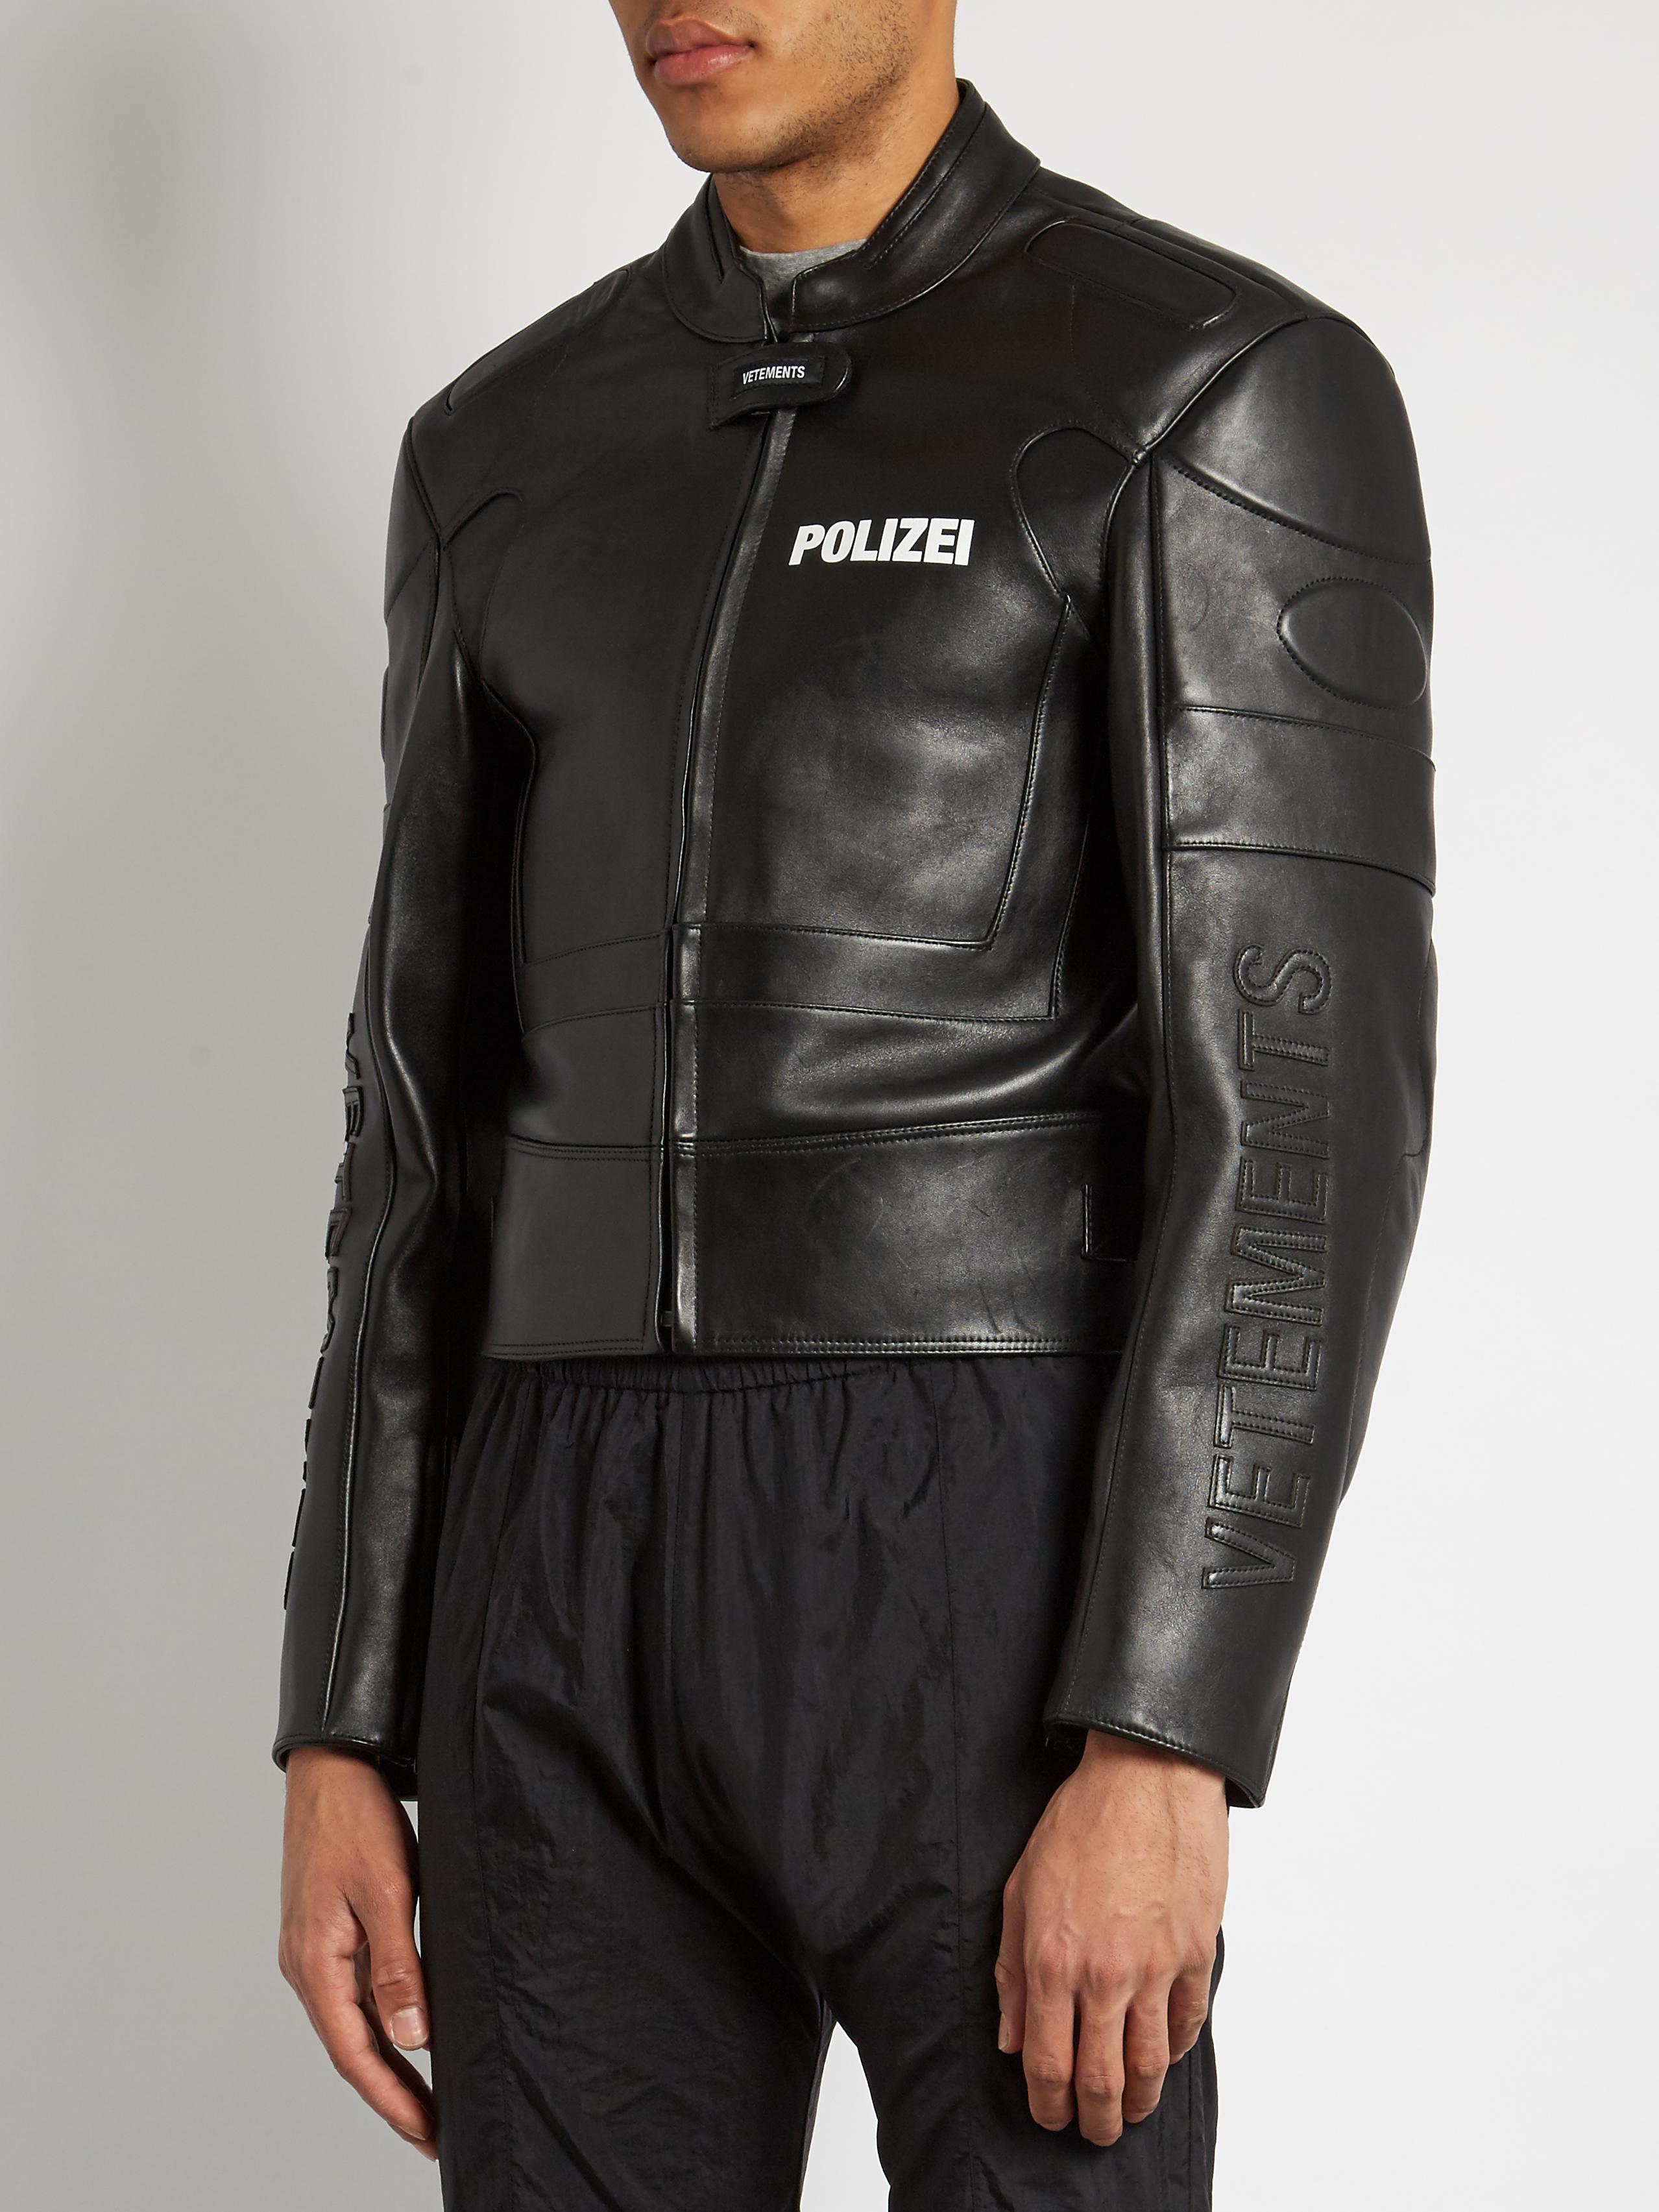 Vetements Polizei-print Panelled Leather Jacket in Black for Men - Lyst